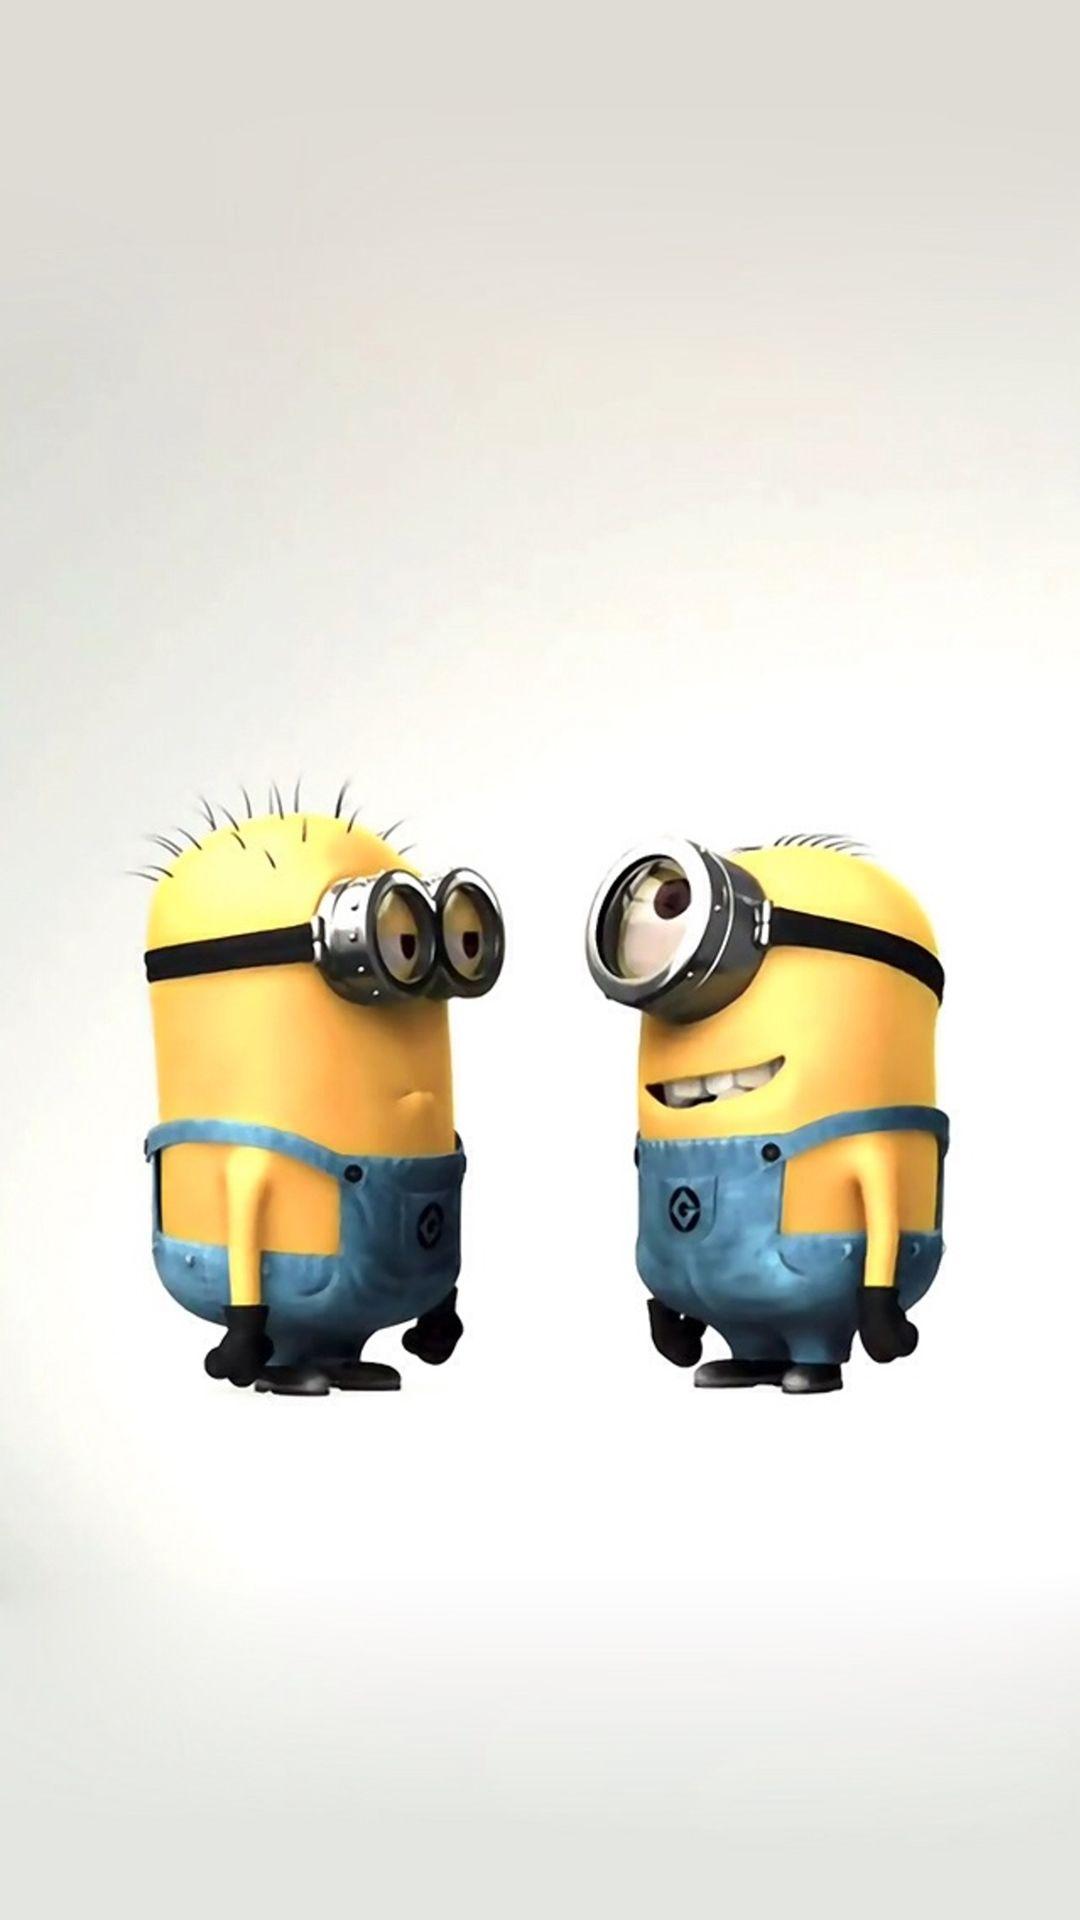 Funny Cute Lovely Minion Couple iPhone 6 wallpaper. Wallpaper